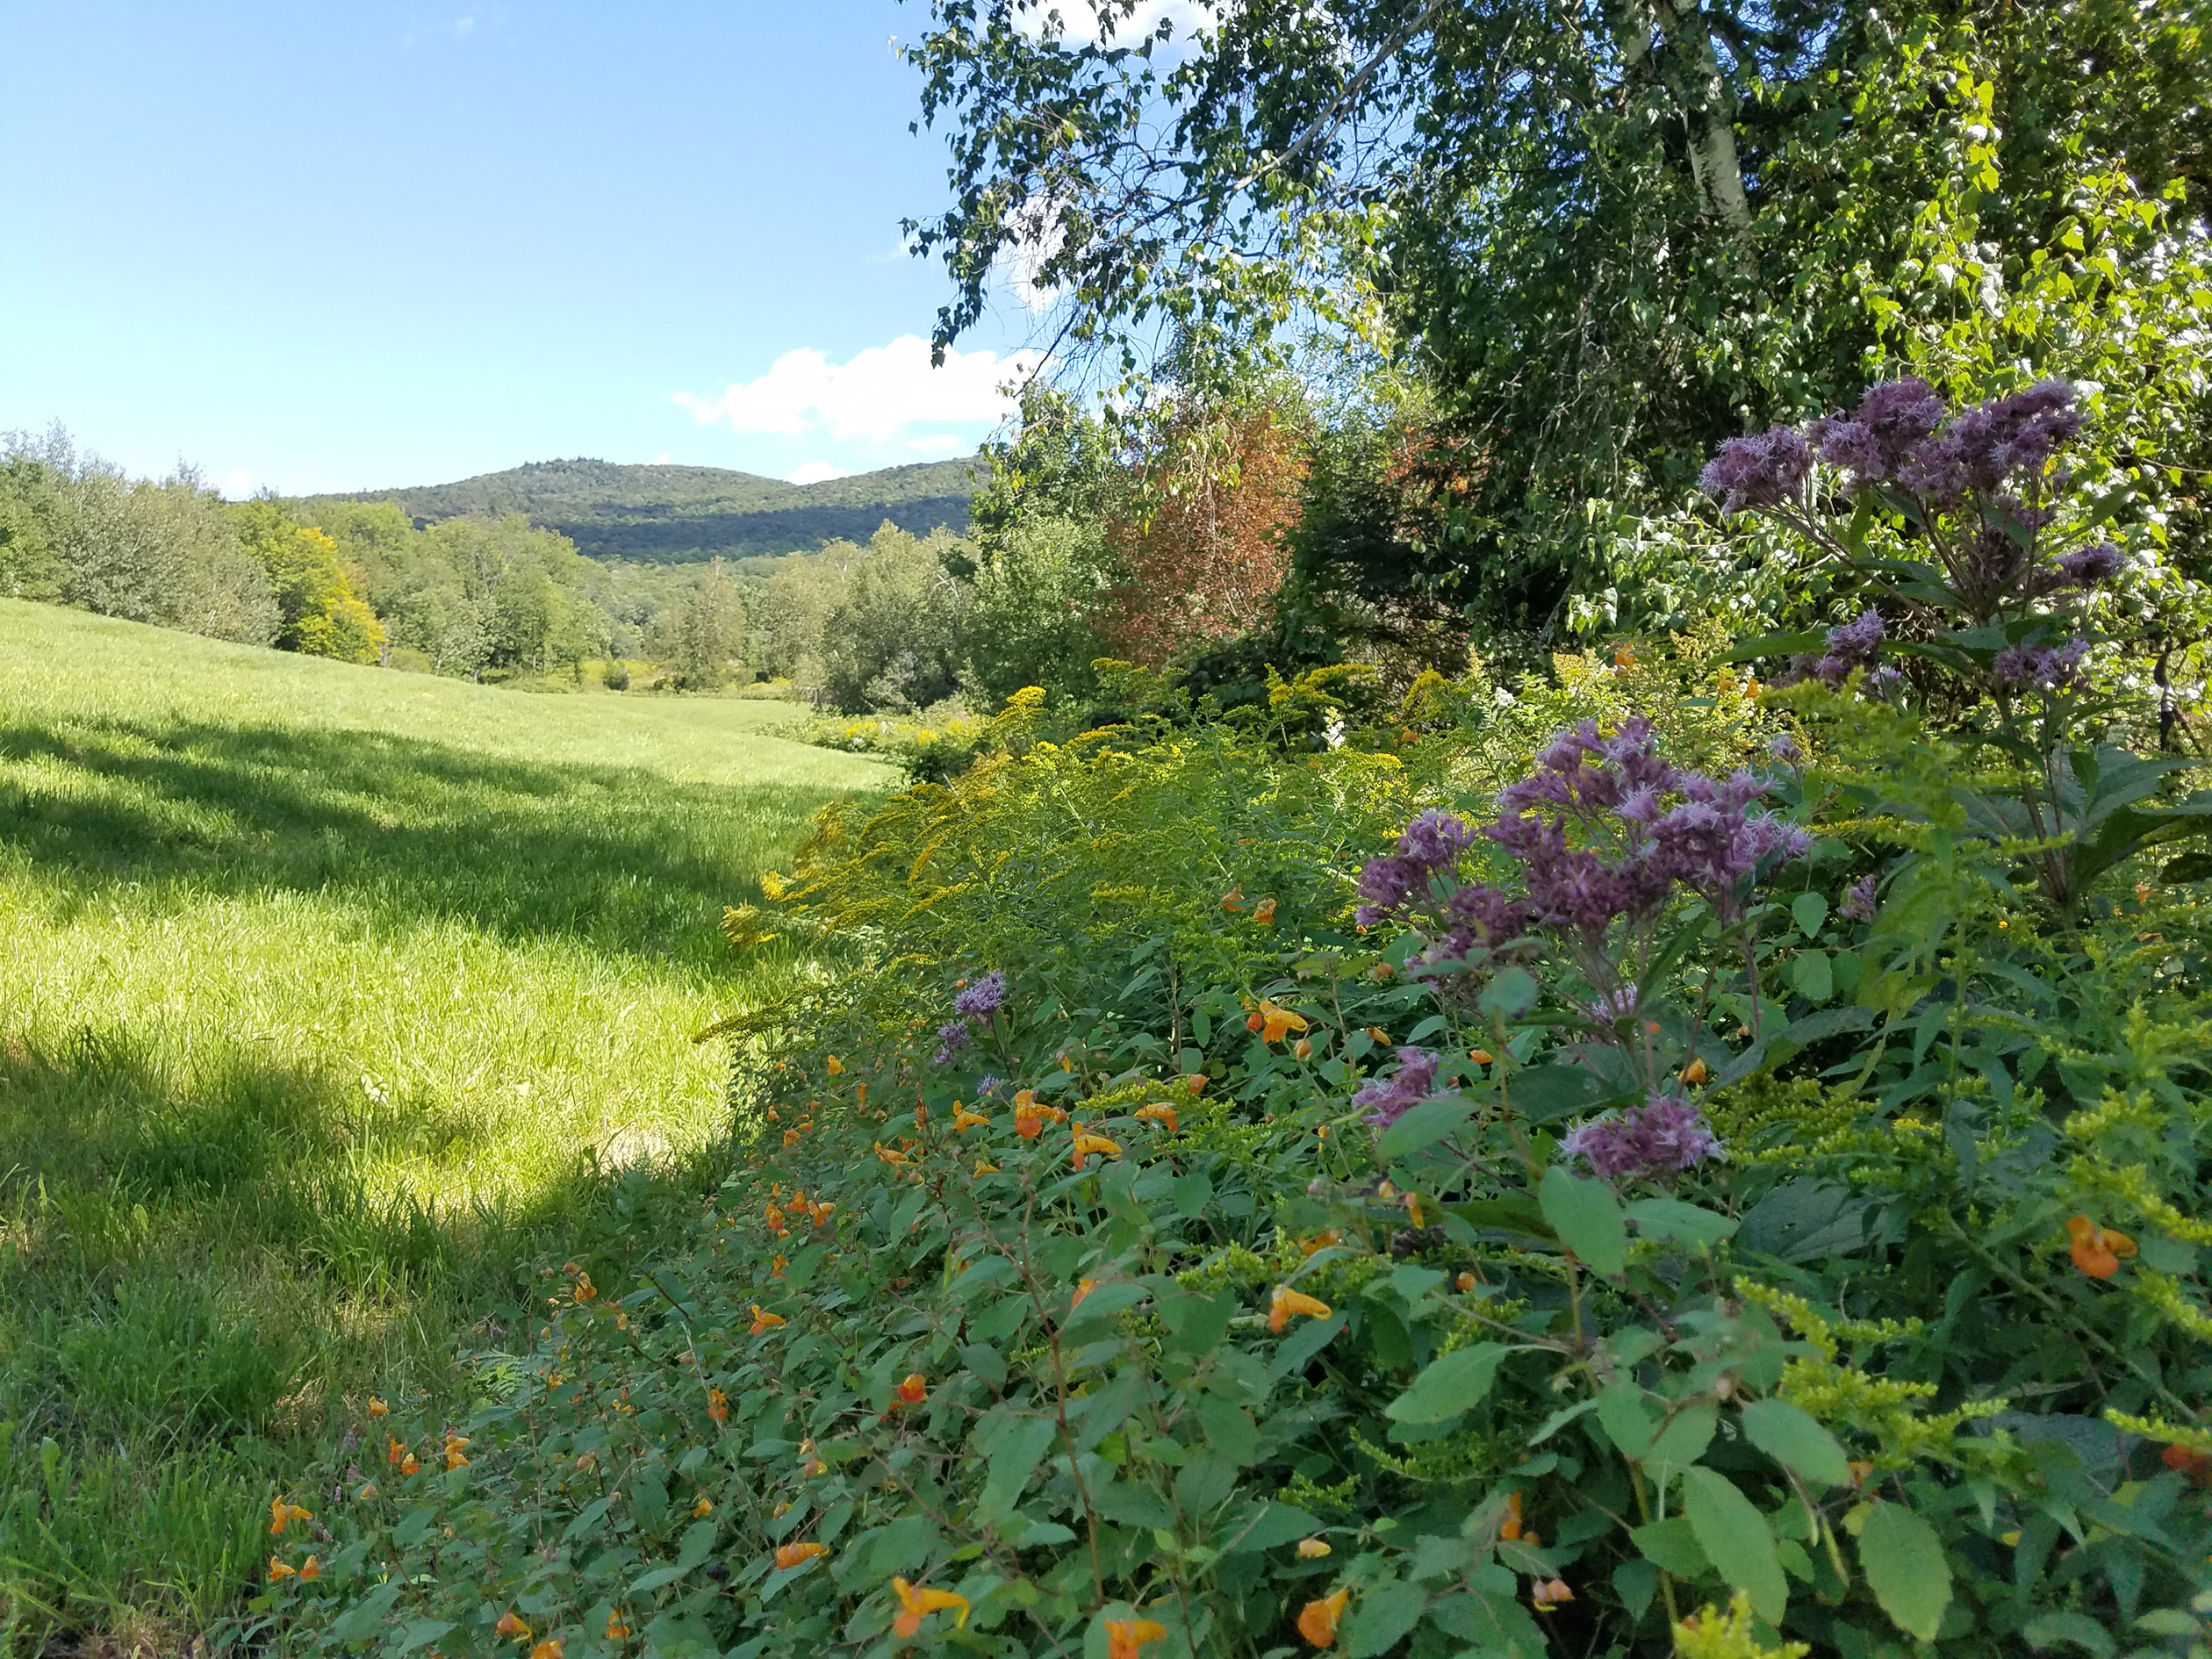 A landscape showing brightly colored wildflowers blooming along the edge of a hayfield, including orange jewelweed, purple joe pye weed, and yellow goldenrod